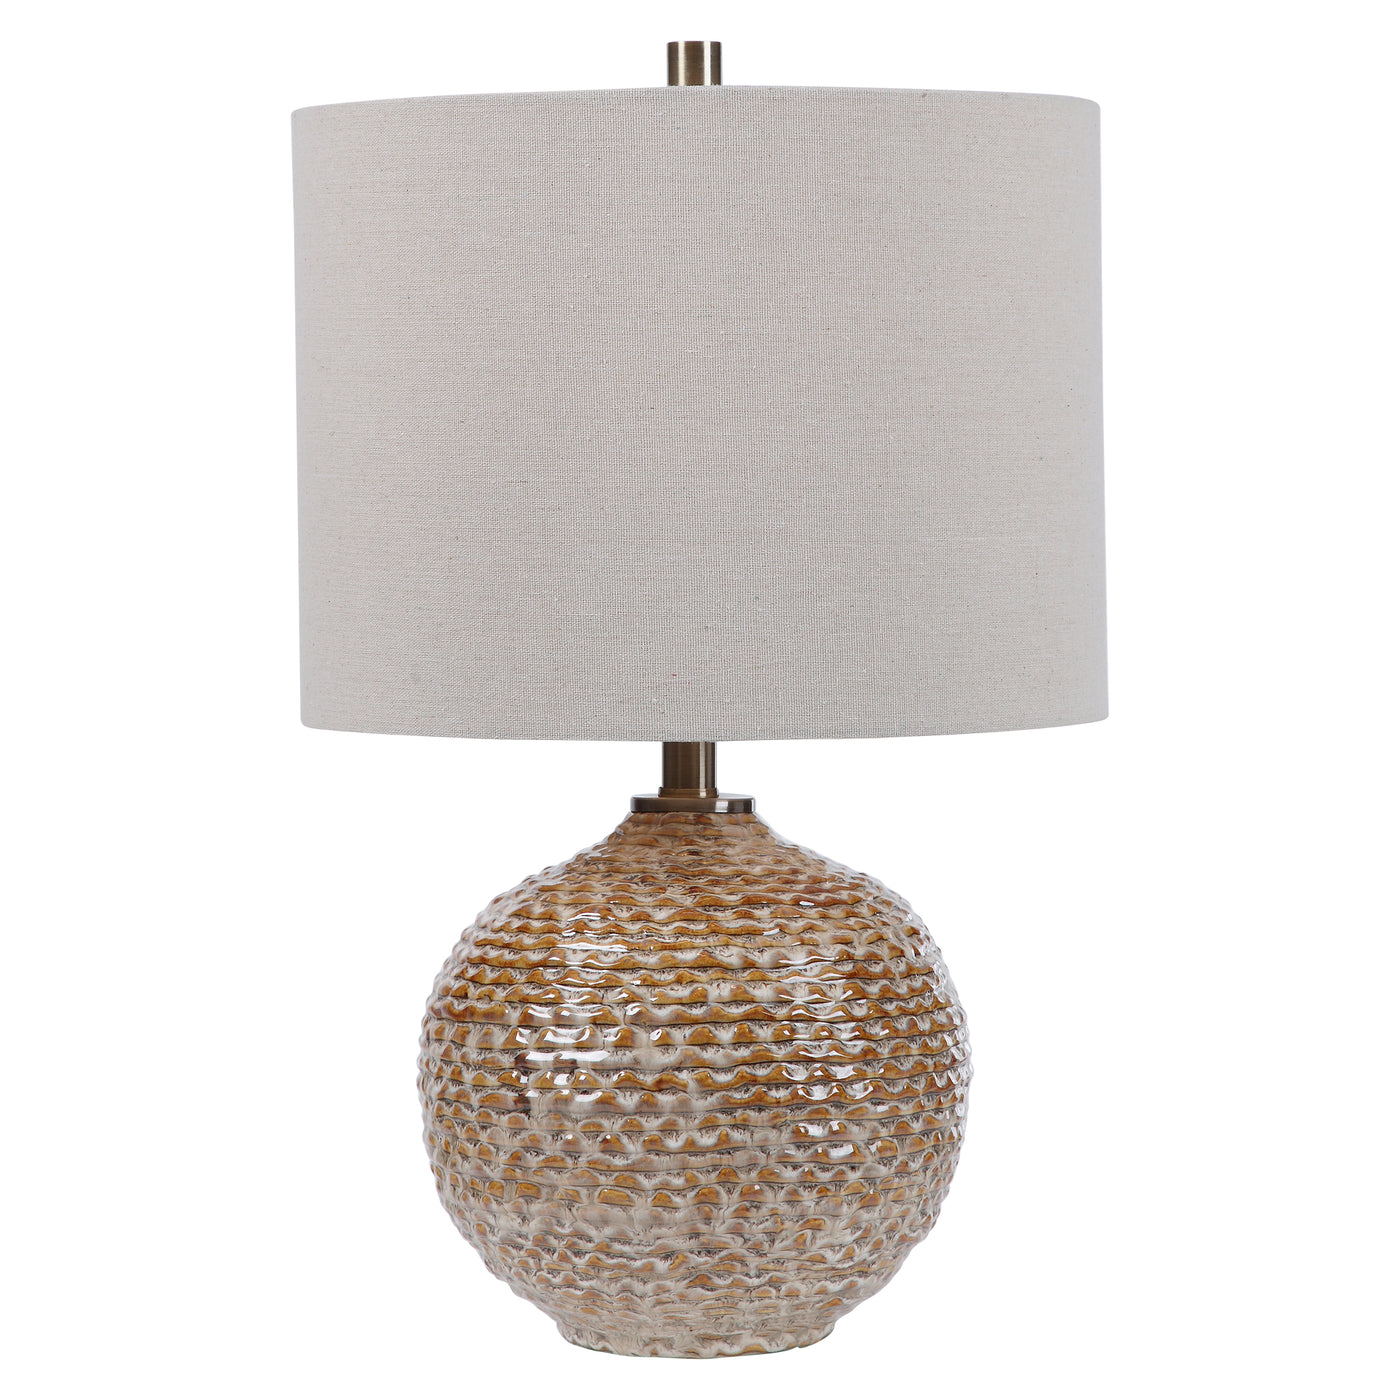 This Unique Ceramic Table Lamp Displays A Rustic, Wavy Ribbed Texture In Rust Brown Glaze Covered In Aged Taupe Tones, Acc...